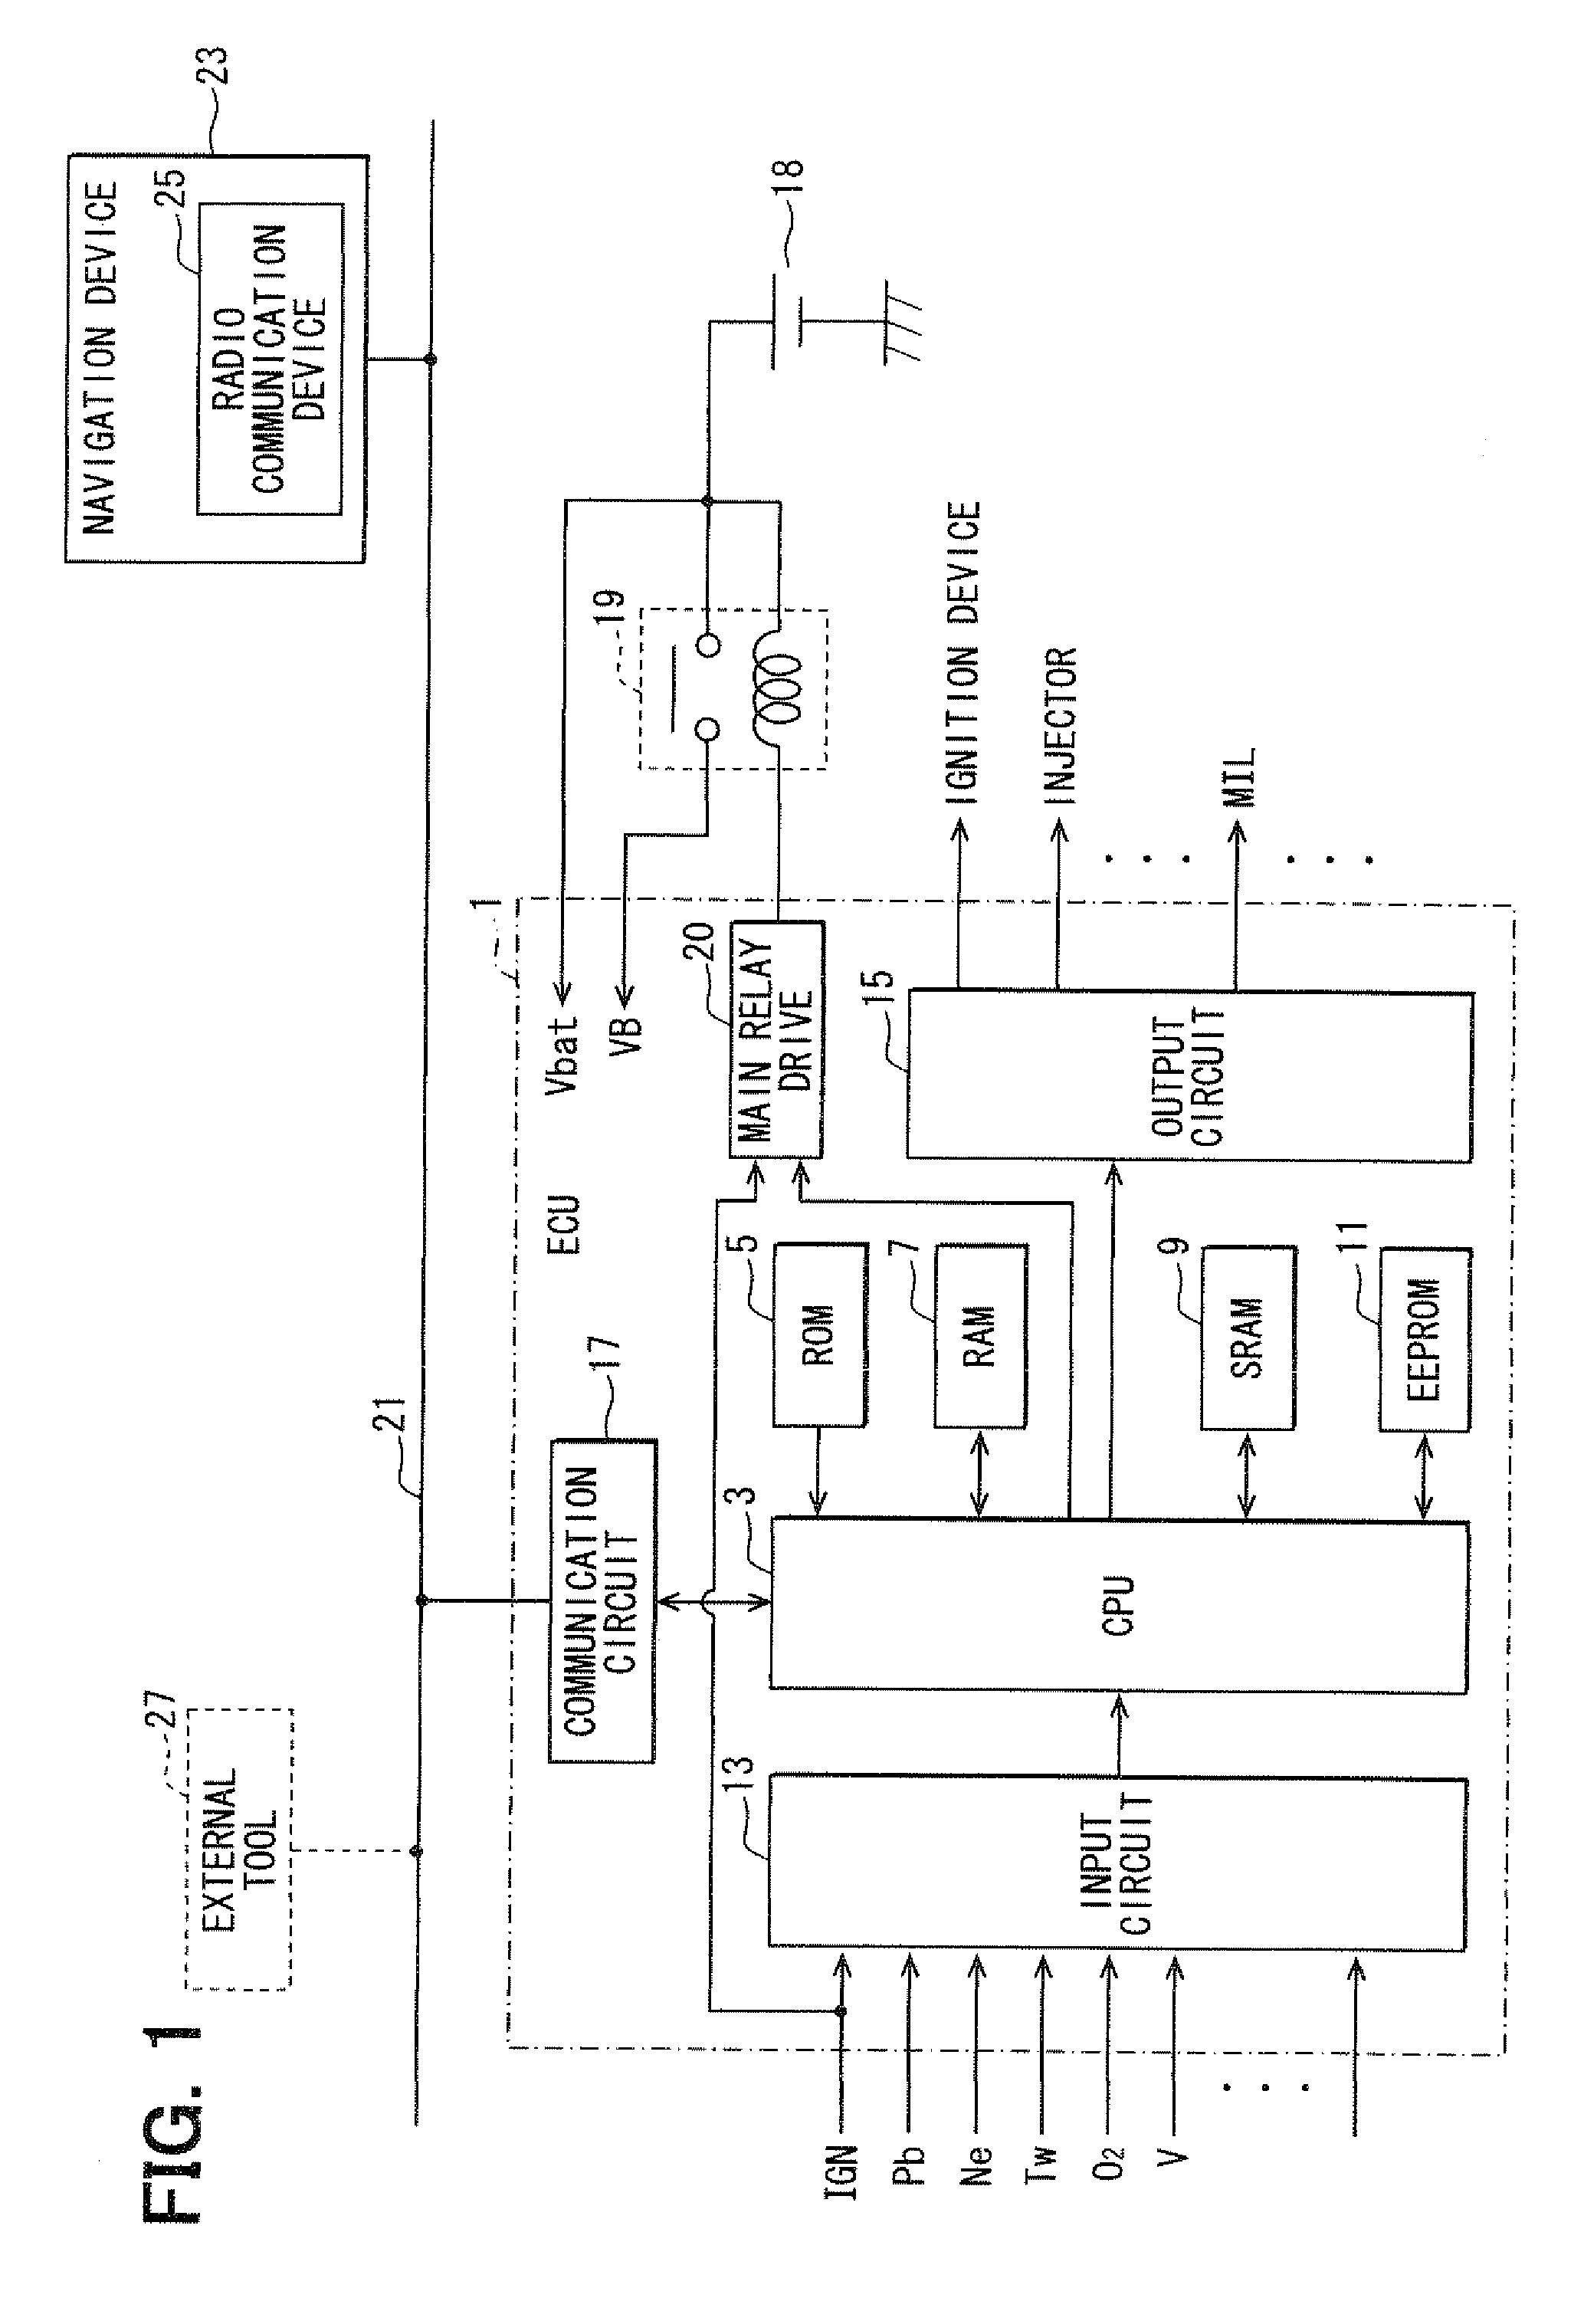 Electronic control system for vehicles